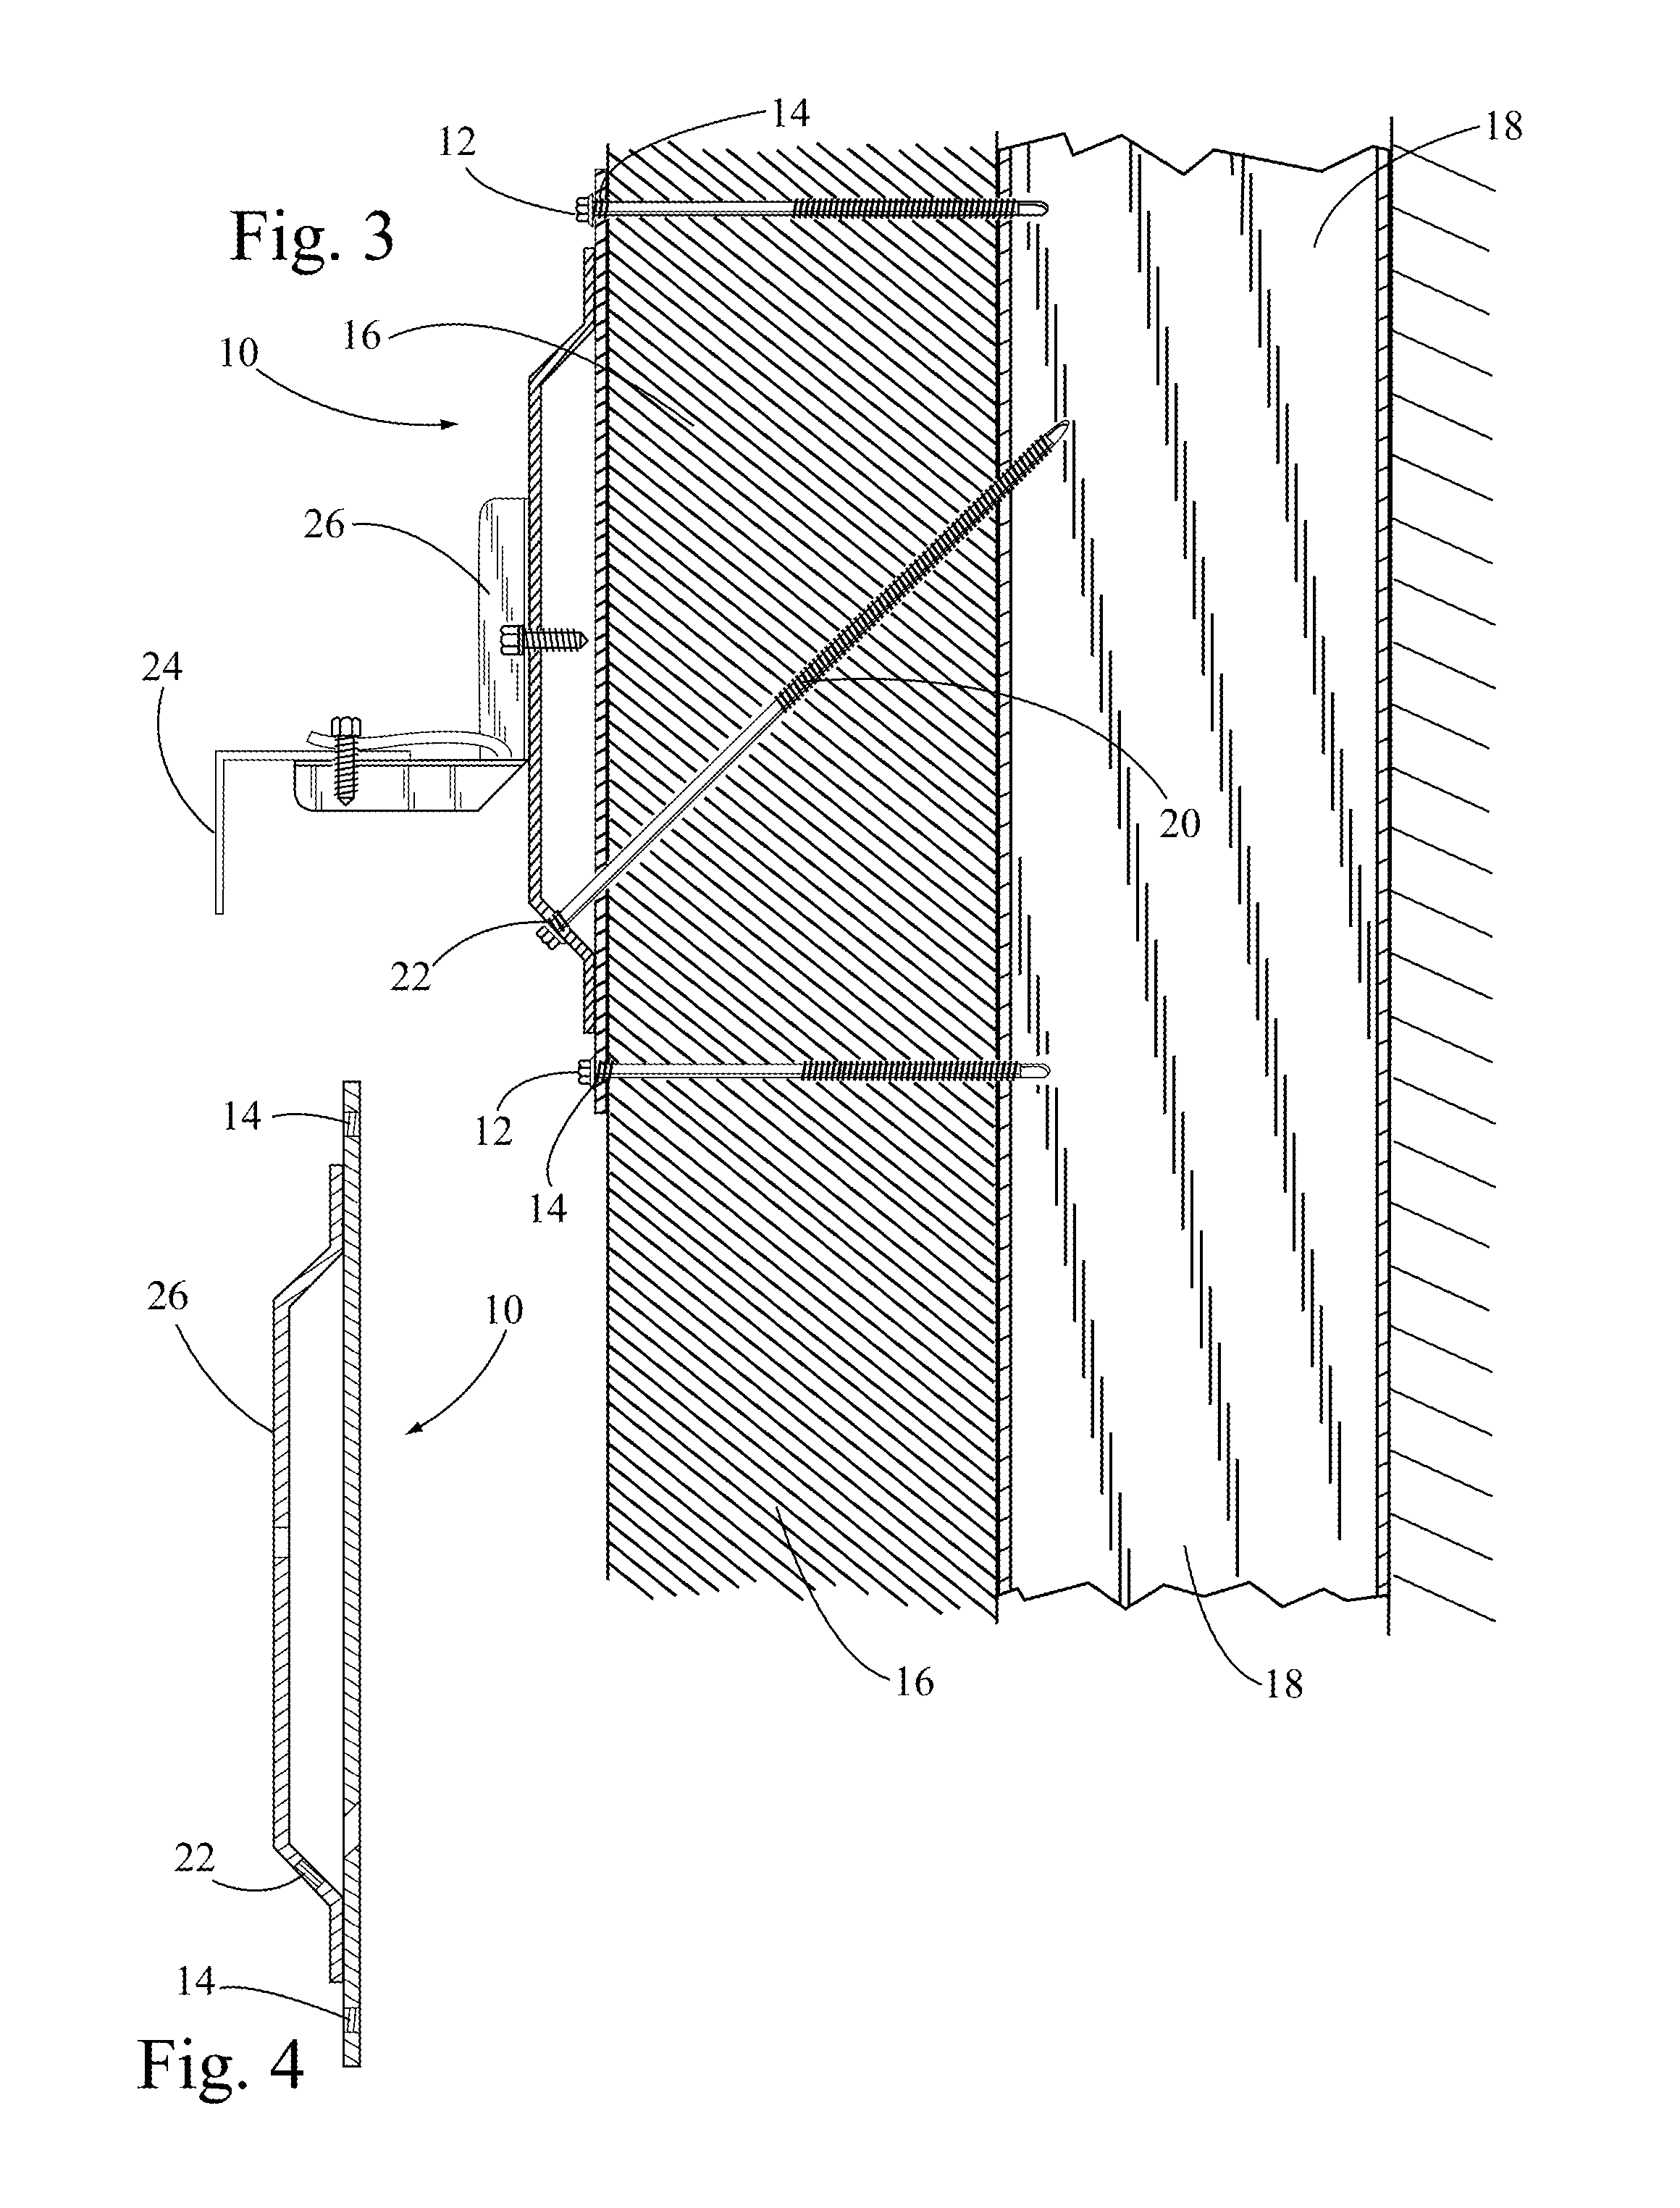 Cladding attachment system to enable an exterior continuous insulation barrier